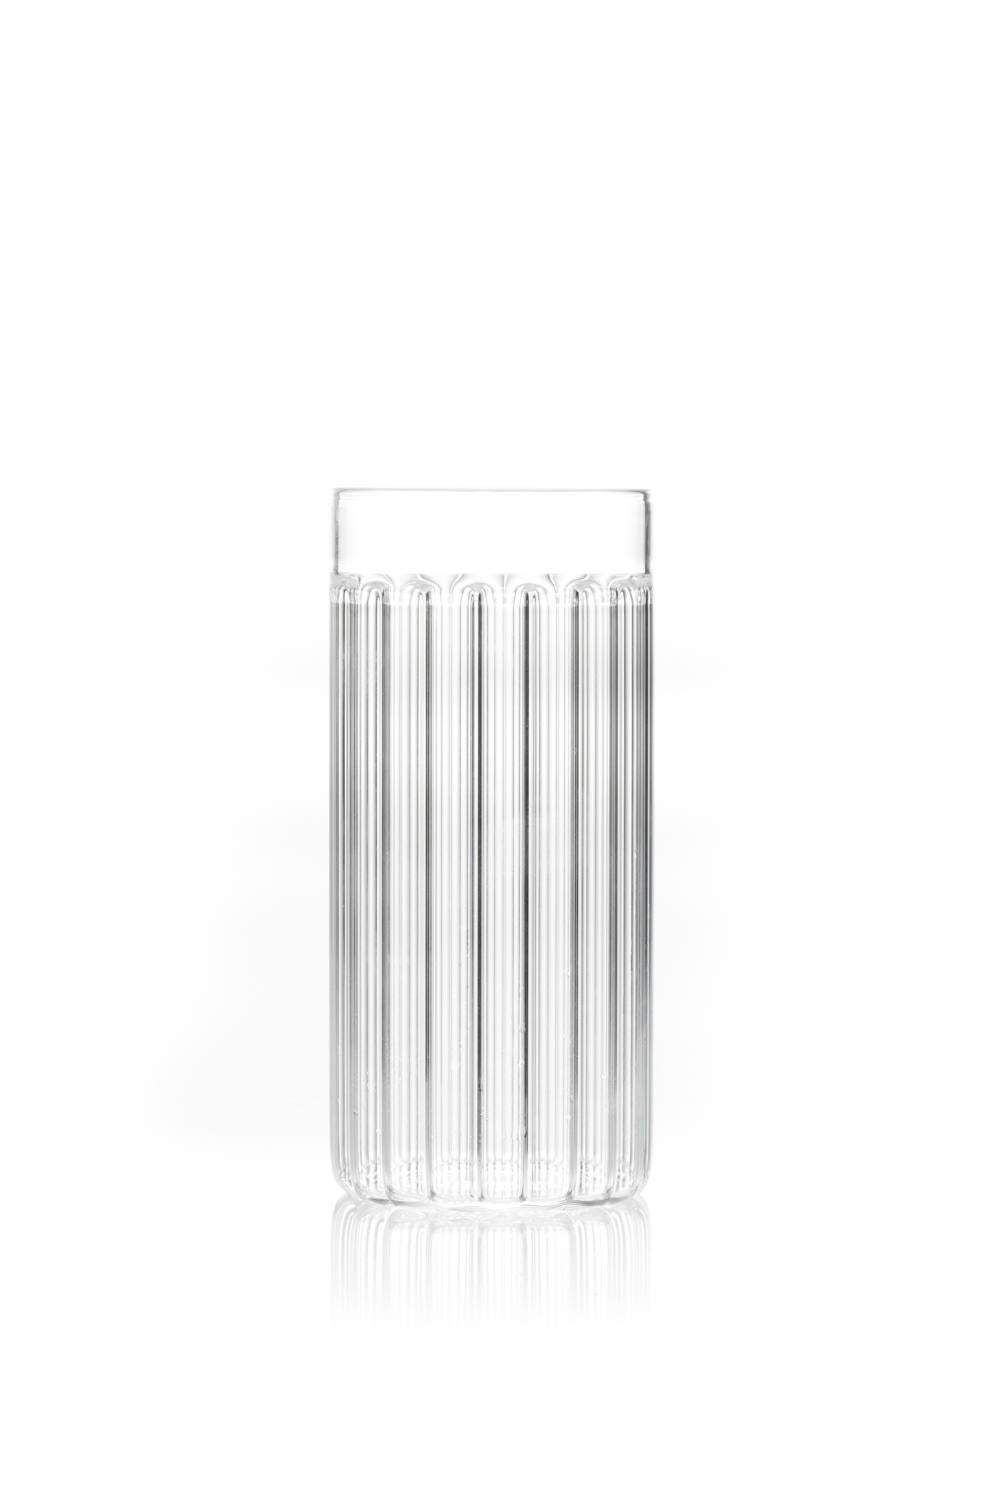 Hand-Crafted fferrone Contemporary Czech Minimal Six Collins with Six Tumbler Glasses Set For Sale